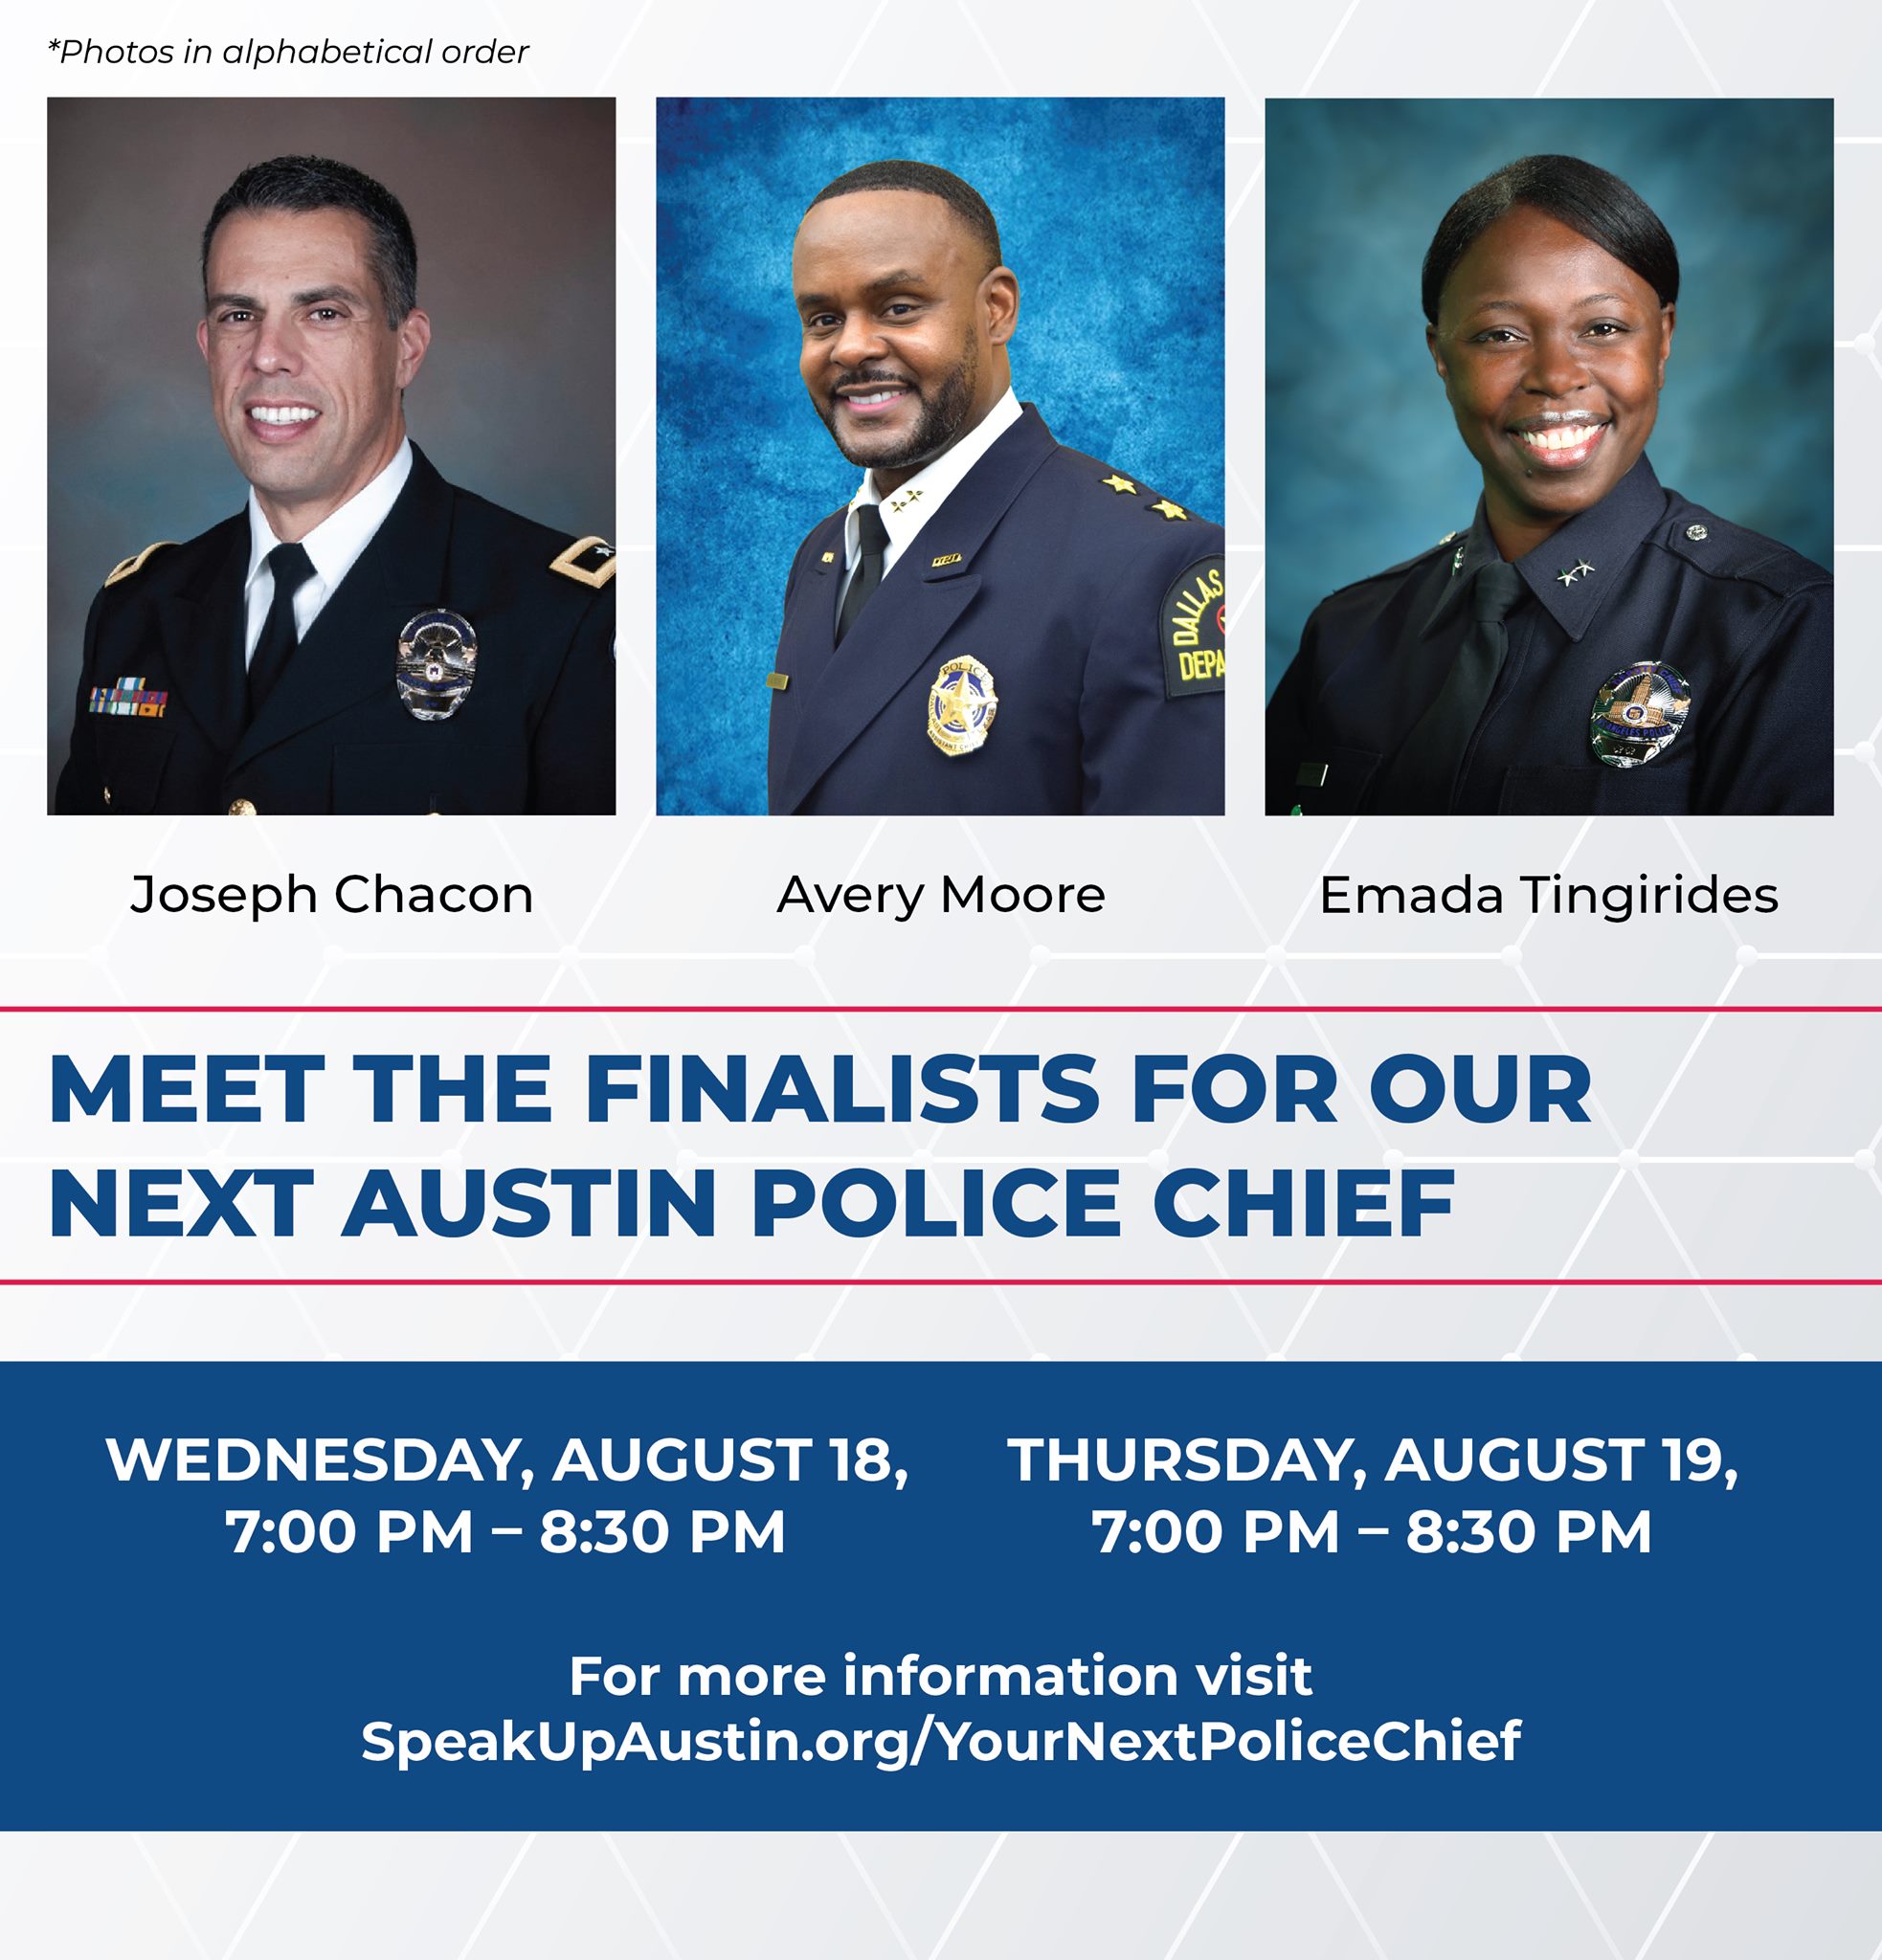 Meet the FInalists for AUstin's CHief of Police